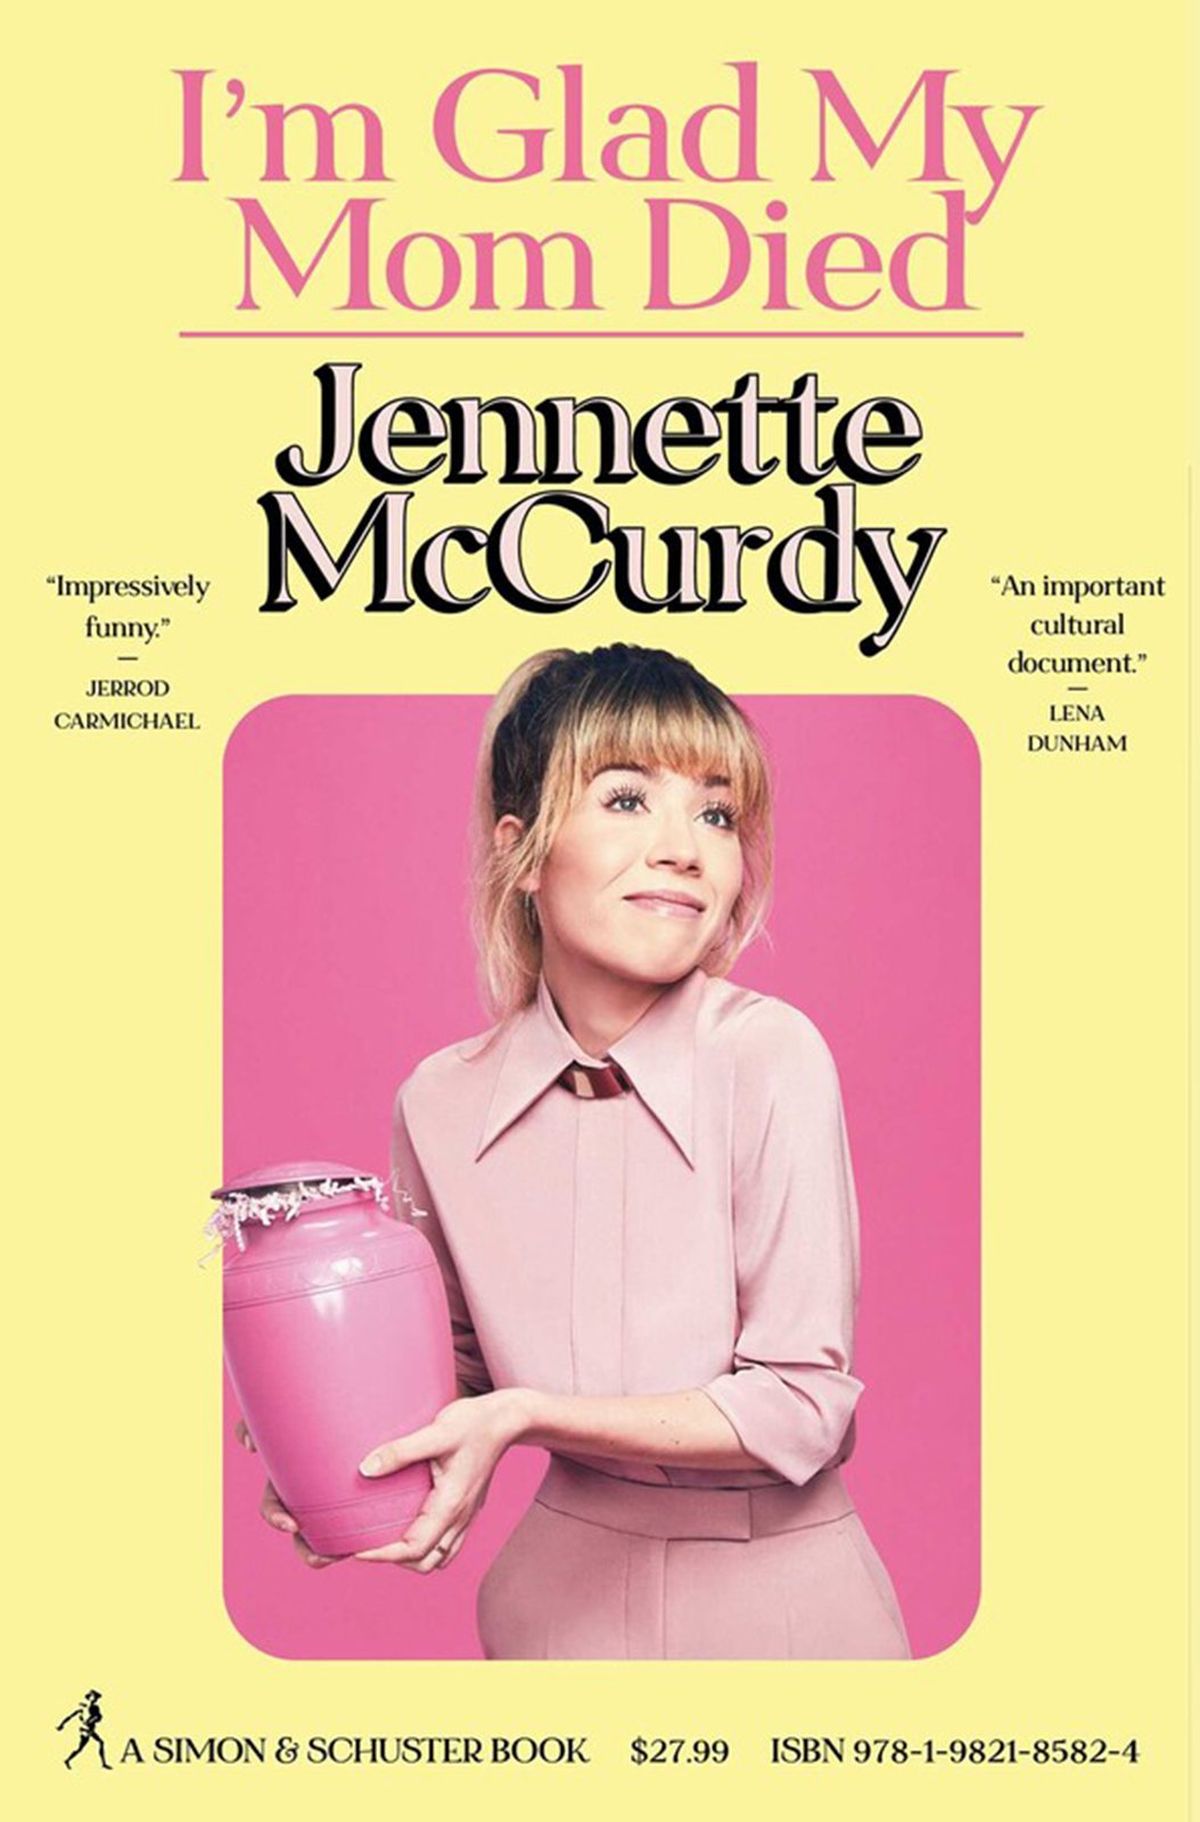 "Iâ€™m Glad My Mom Died," by Jennette McCurdy (Simon & Schuster/TNS)  (Simon & Schuster/Simon & Schuster/TNS)